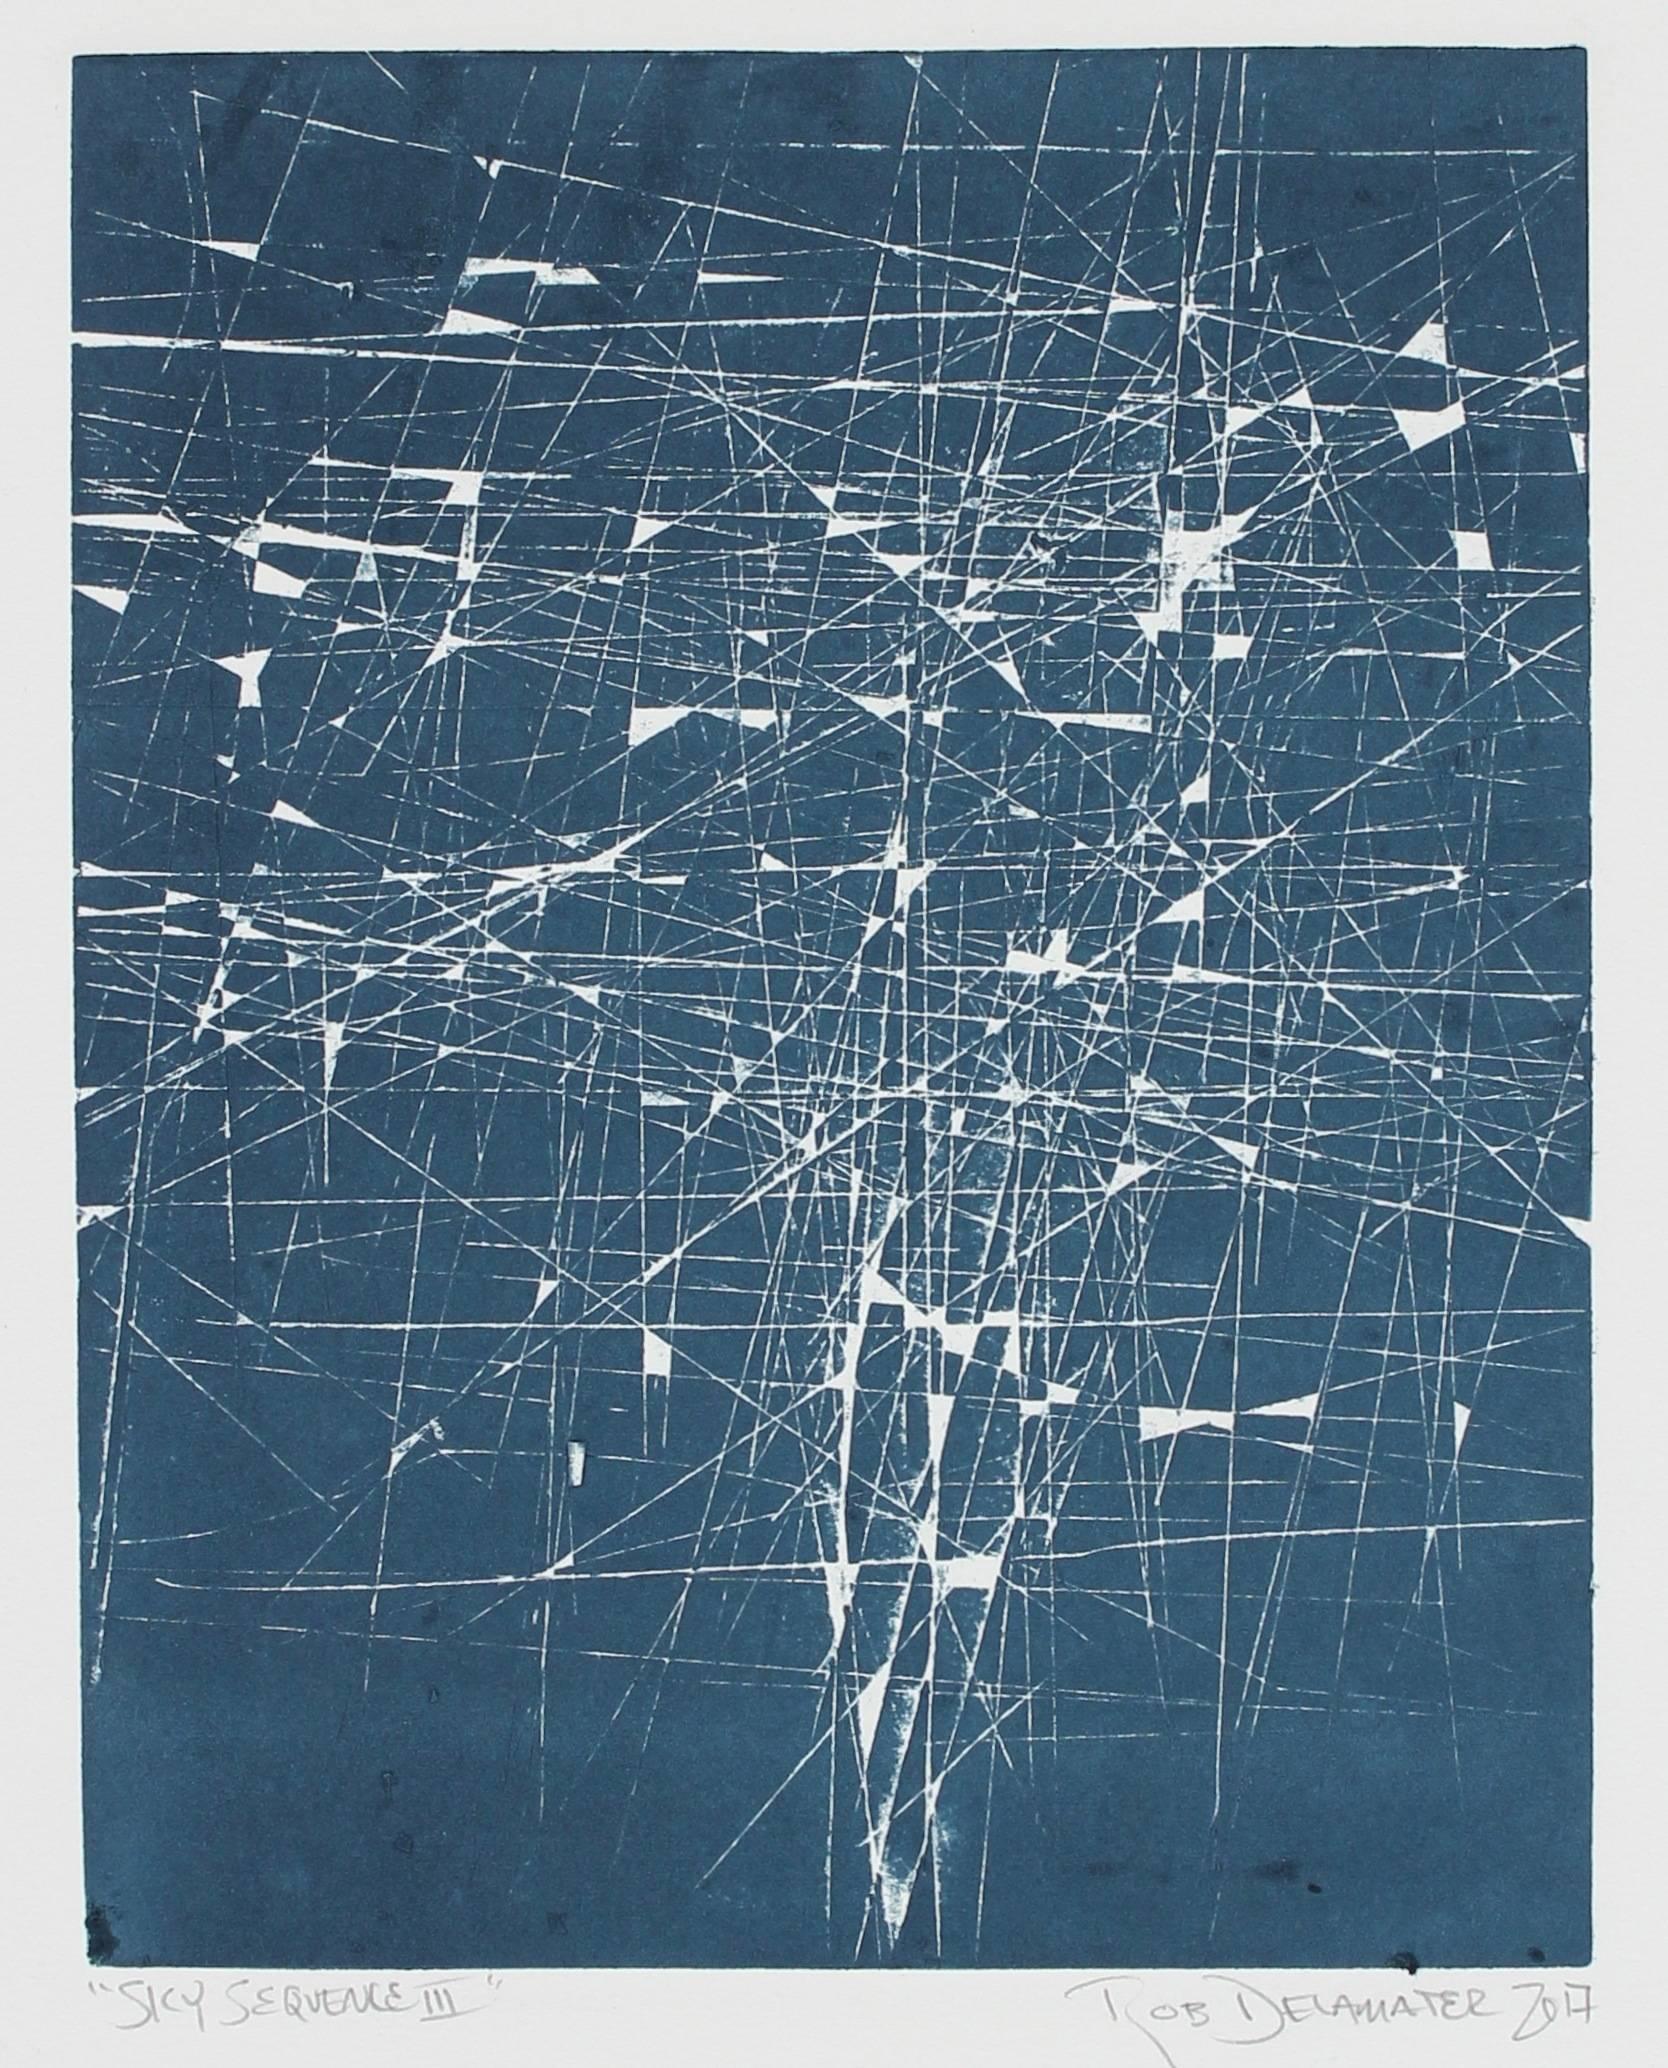 Rob Delamater Abstract Print - "Sky Sequence III" Abstract Relief Print in Blue, 2017